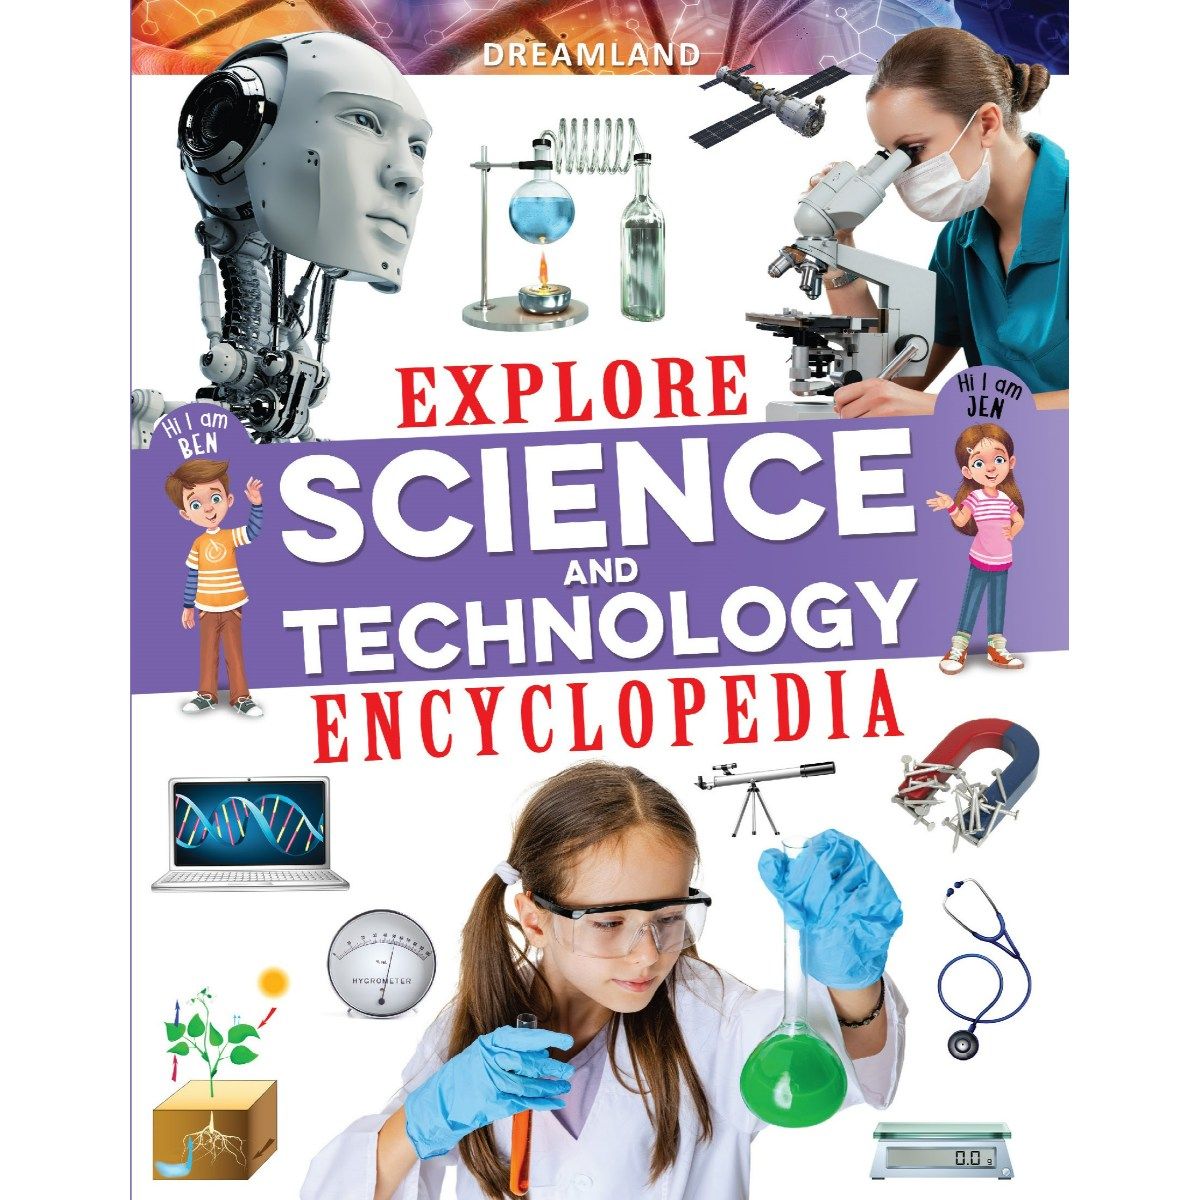 Book:　And　Science　Explore　at　Reference　Technology　Encyclopaedia　Encyclopaedia　Science　Online　Kid　India　Book　Buy　Kid　Dreamland　Explore　Technology　in　Reference　Best　Price　Nykaa　Dreamland　And